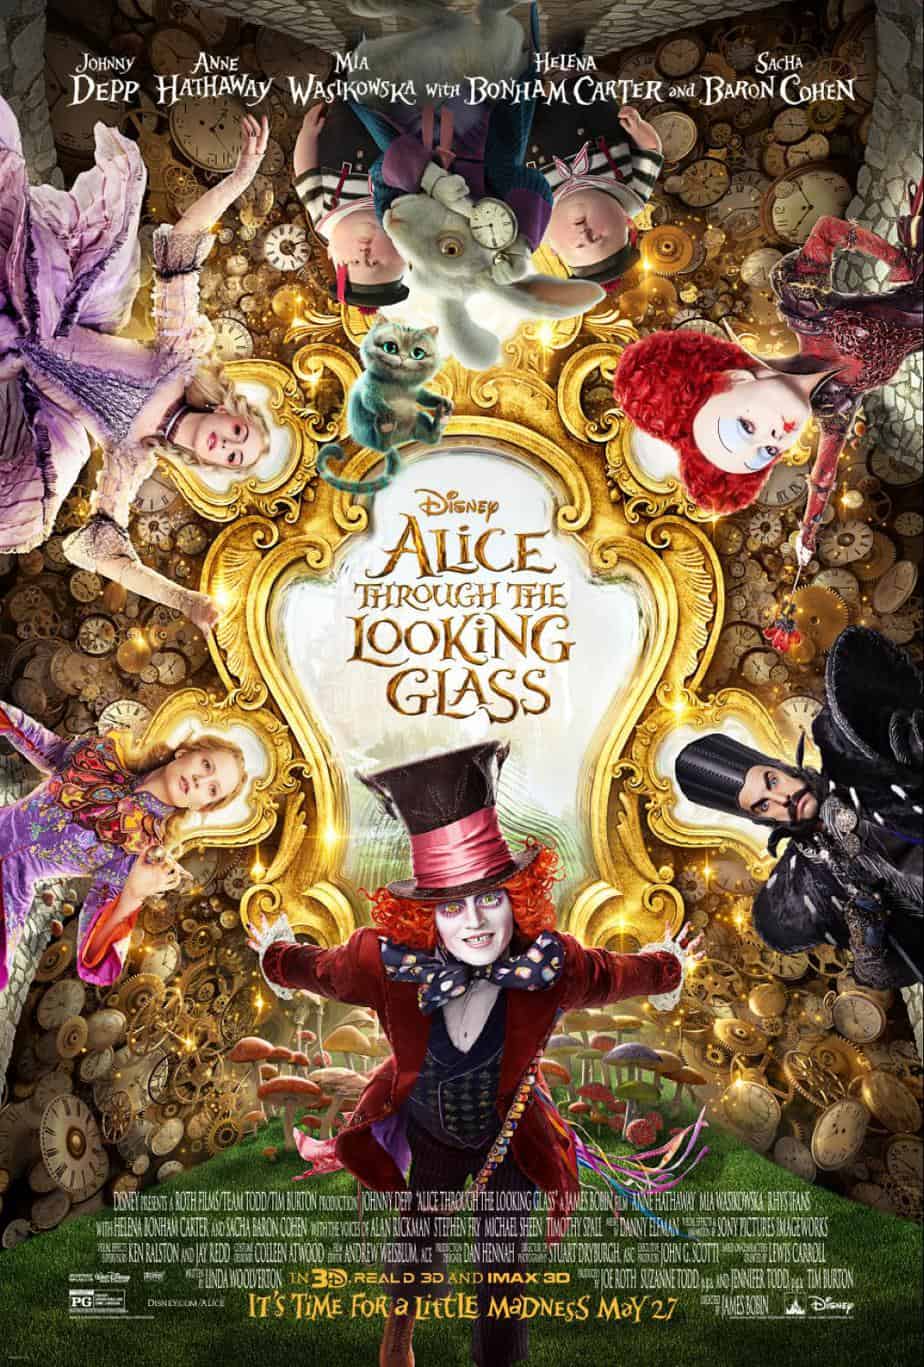 MOVIE REVIEW: Alice Through the Looking Glass